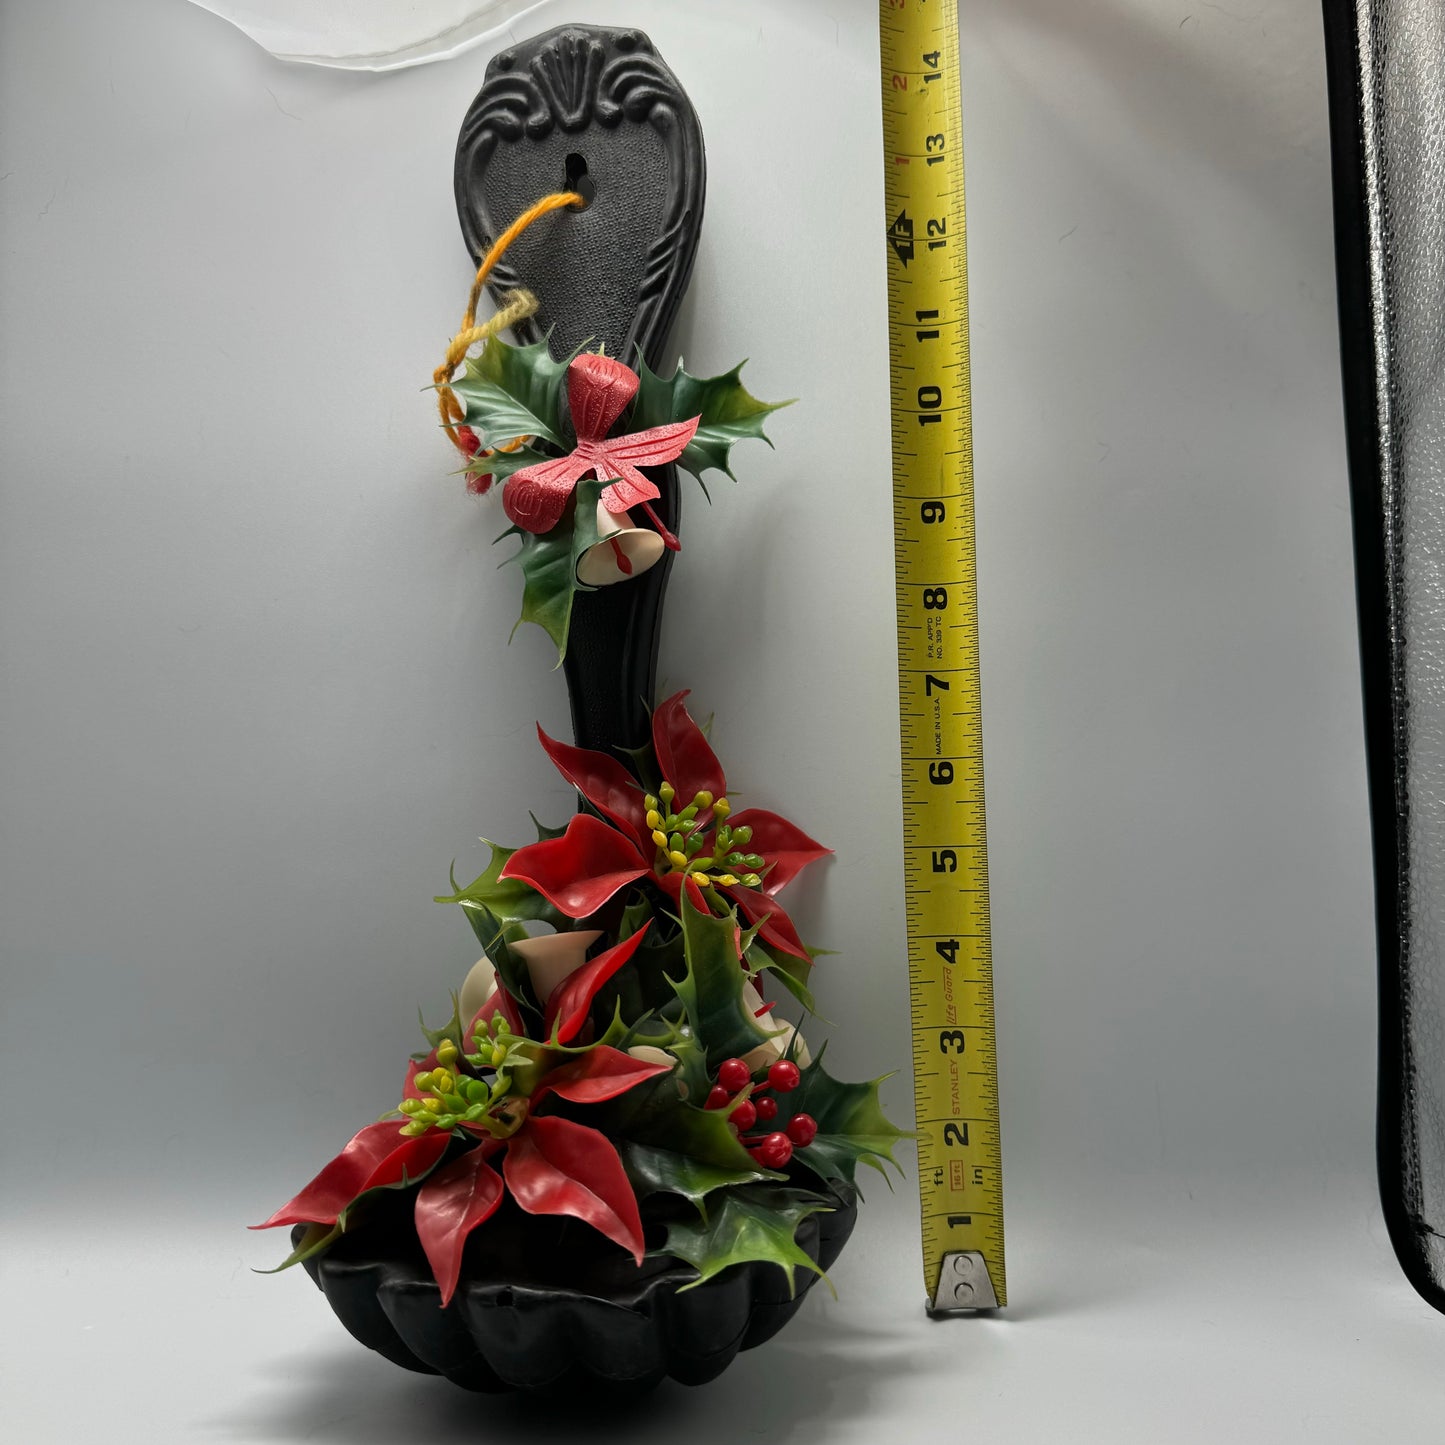 Vintage Plastic Christmas Ladle with Poinsettias and Holly